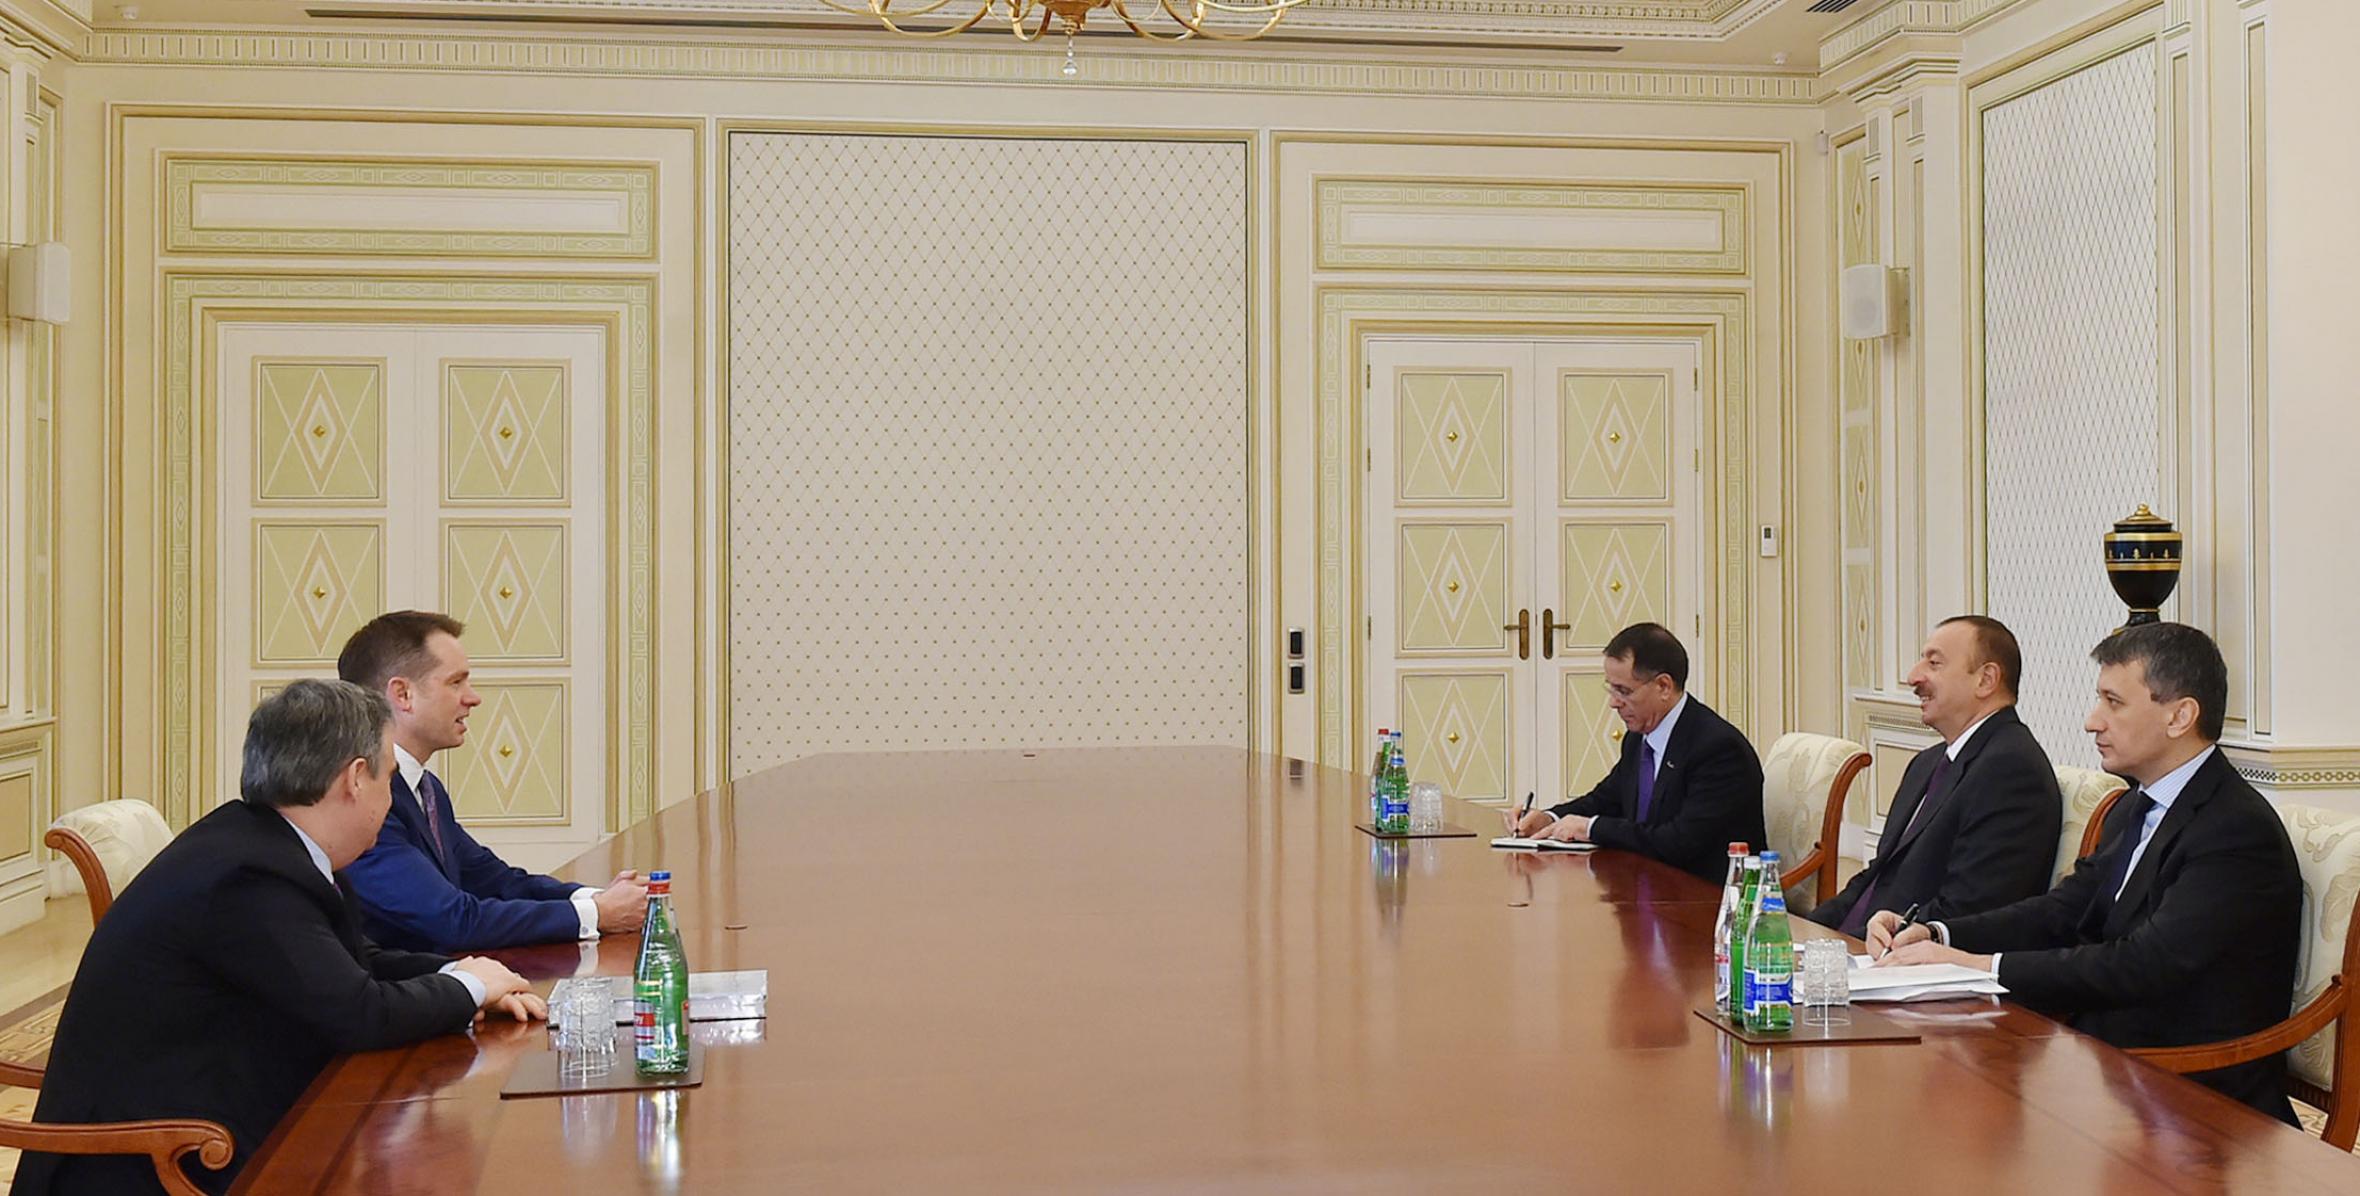 Ilham Aliyev received the CEO of BBC Global News